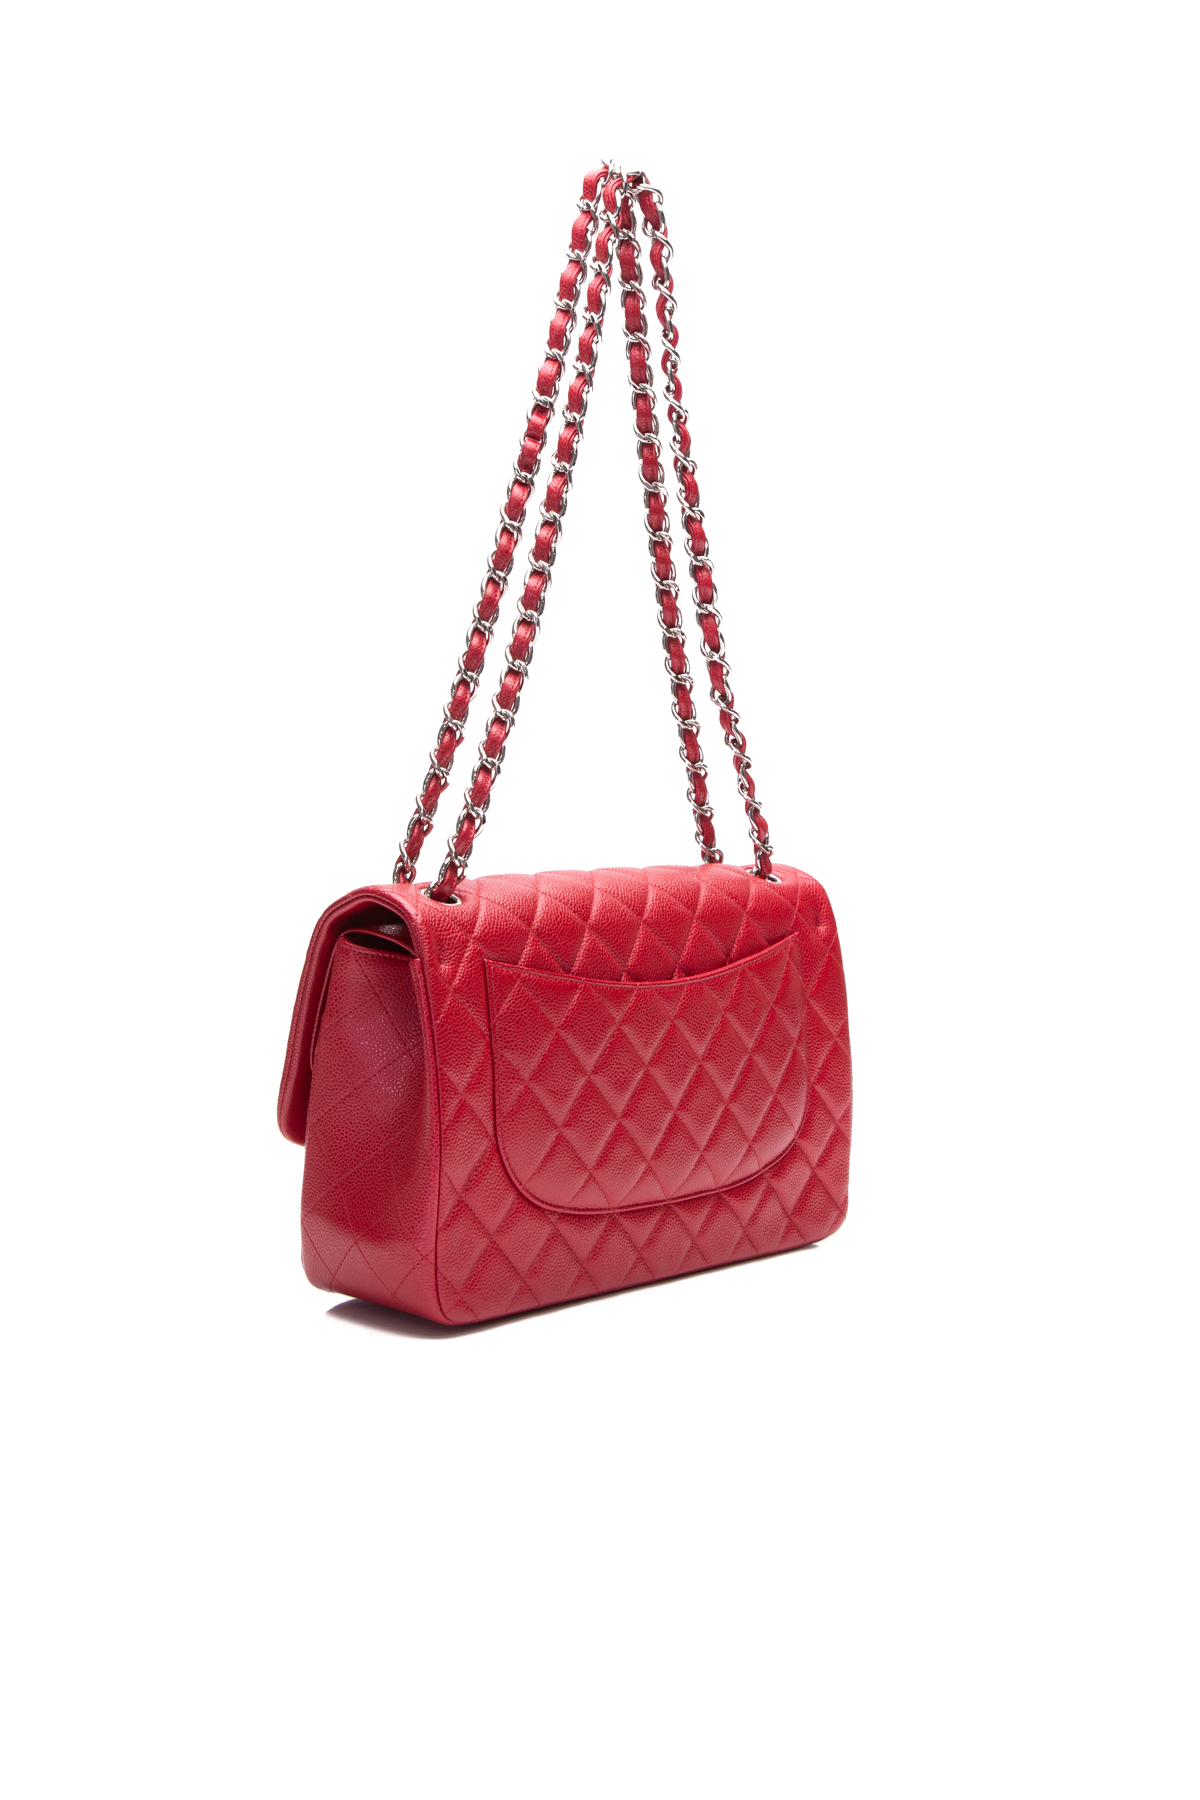 Chanel Red Quilted Lambskin Classic Jumbo Double Flap Bag